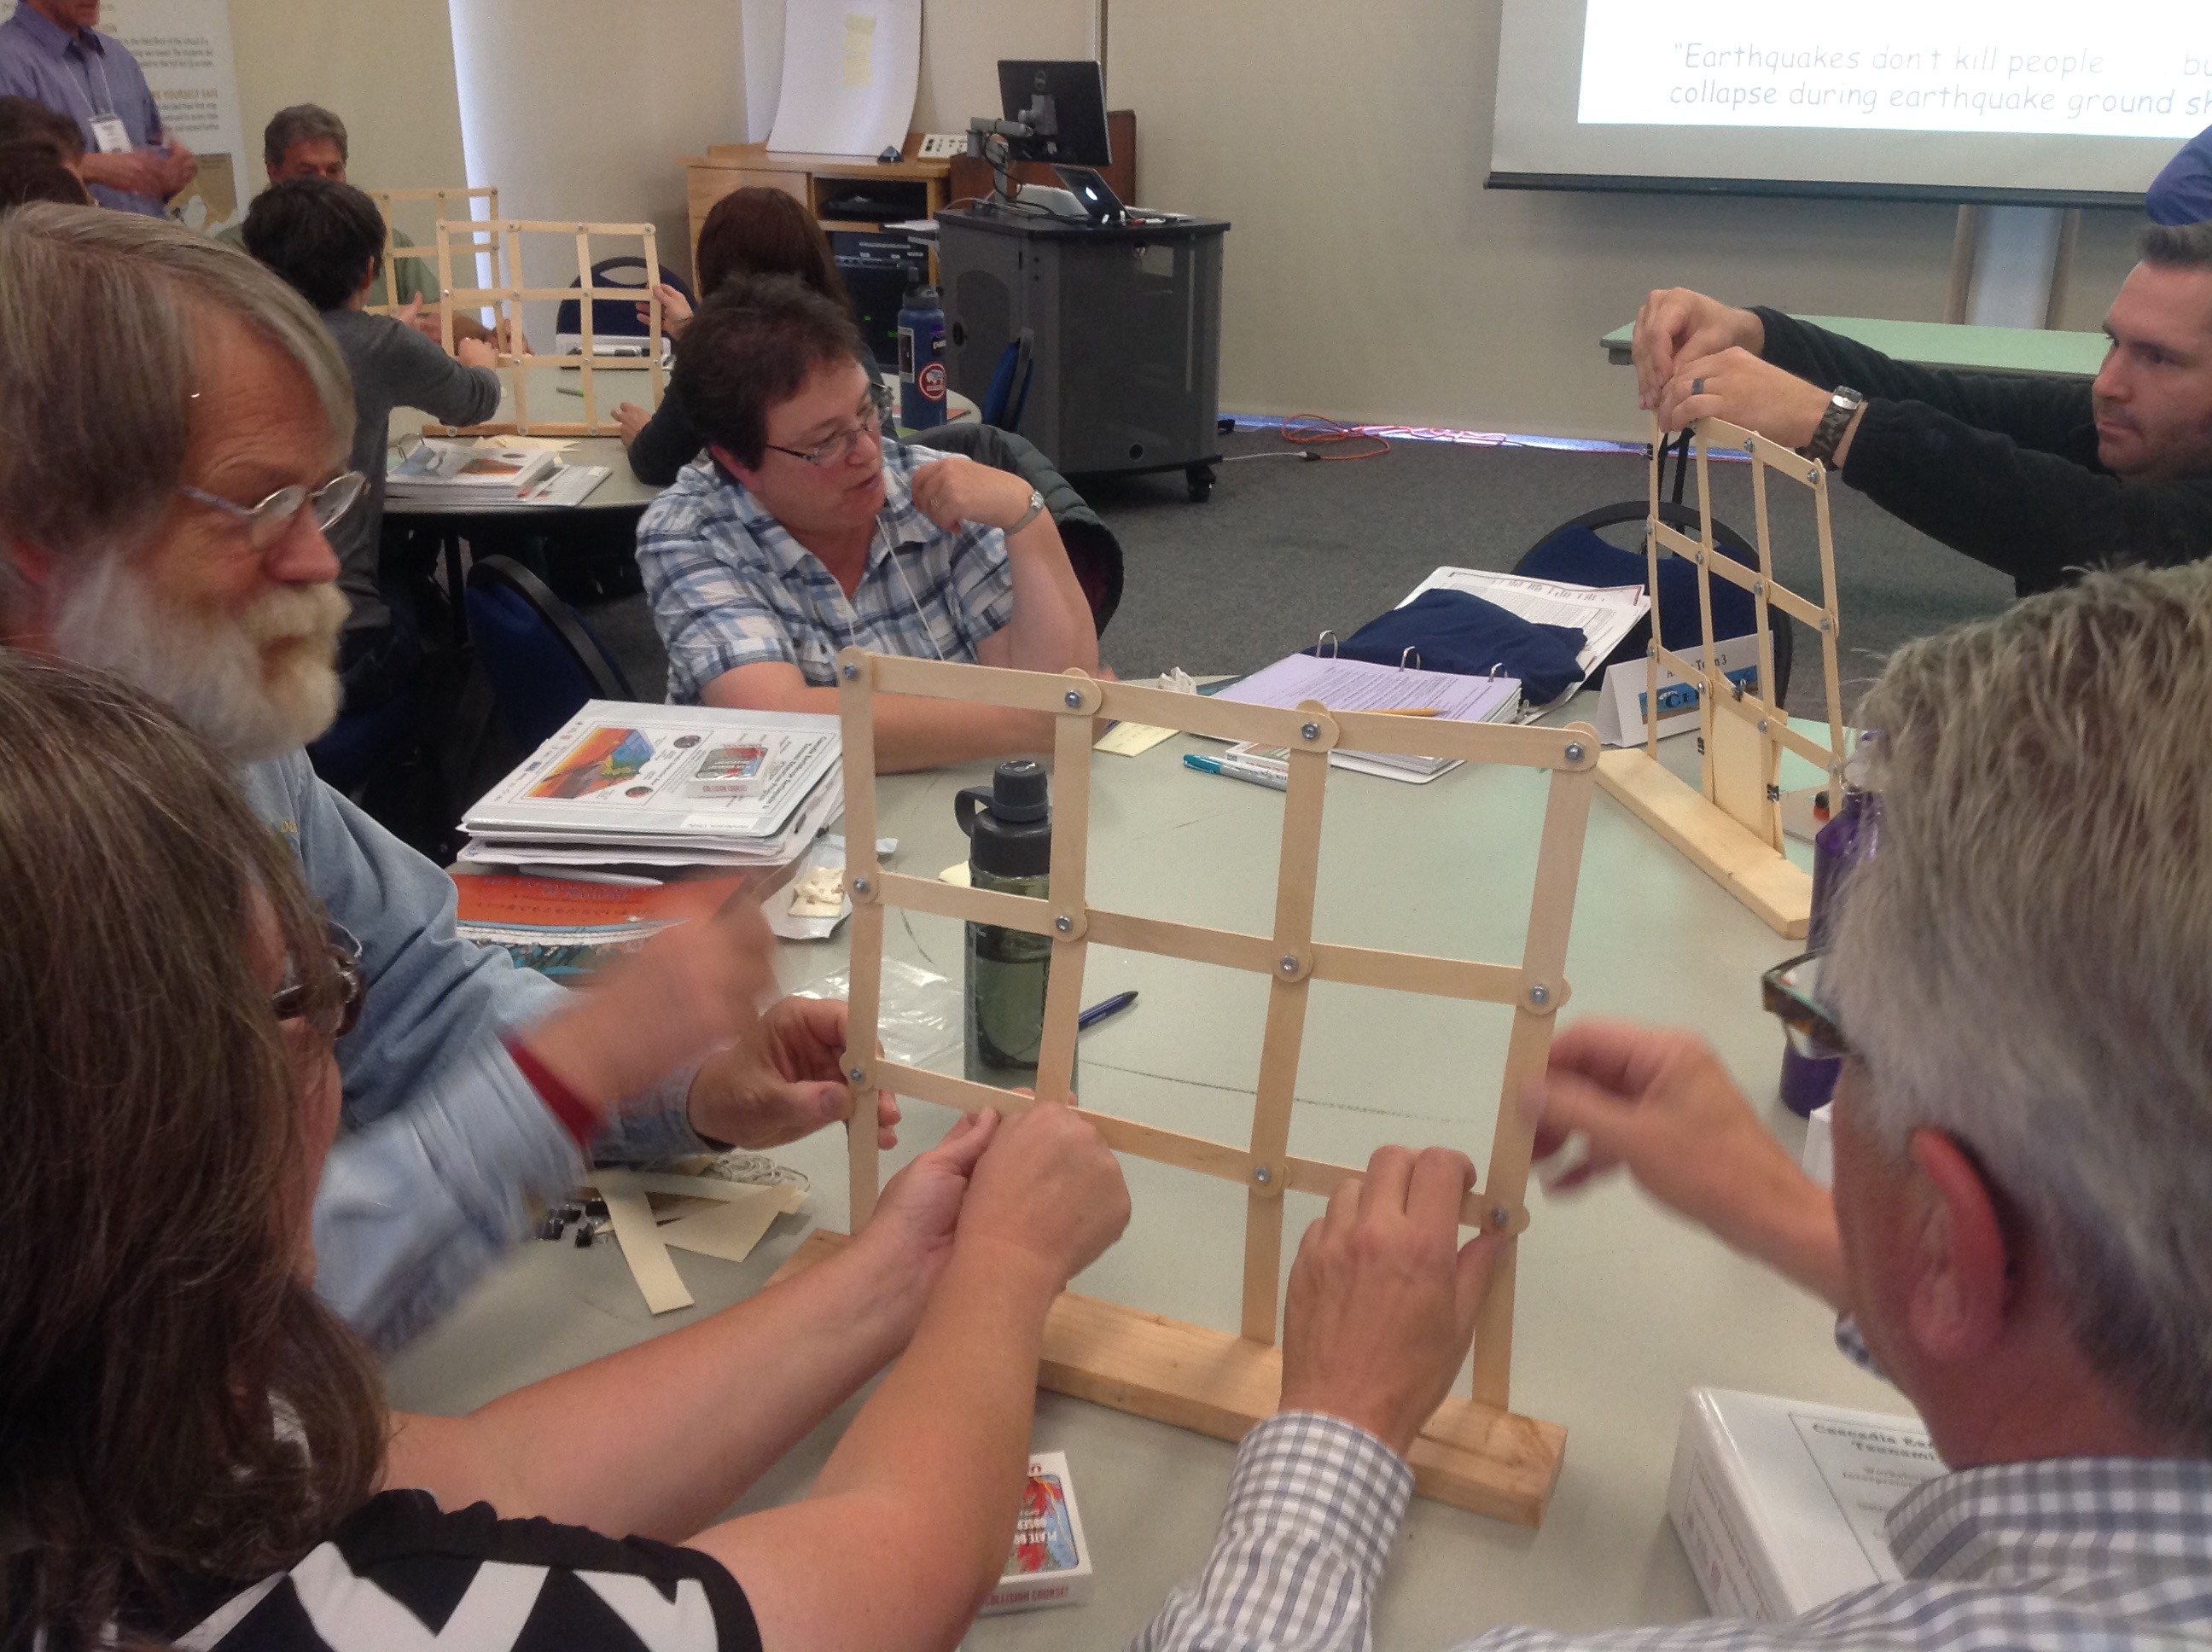 Workshop participants work with the "Build a Better Wall" activity, which allows learners to investigate earthquake-resilient engineering practices.